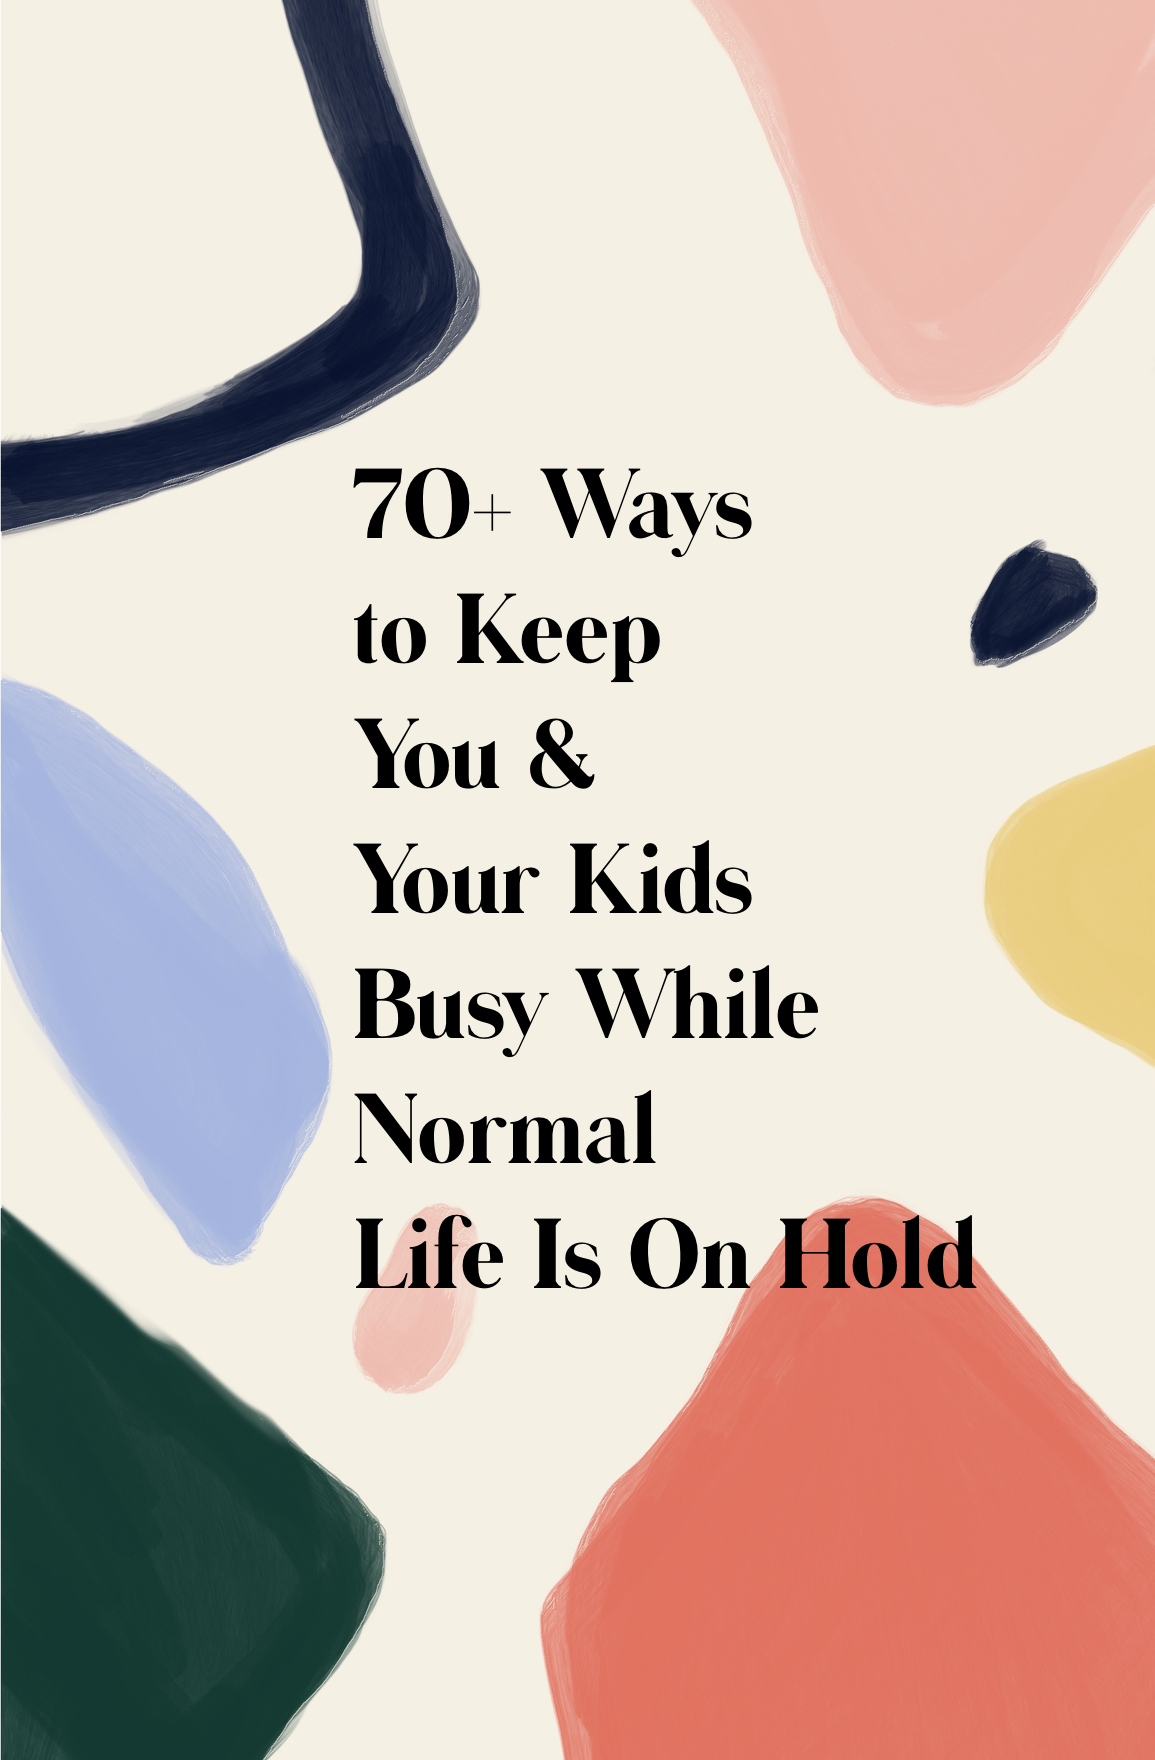 70+Ways to Keep You & Your Kids Busy While Normal Life is on Hold